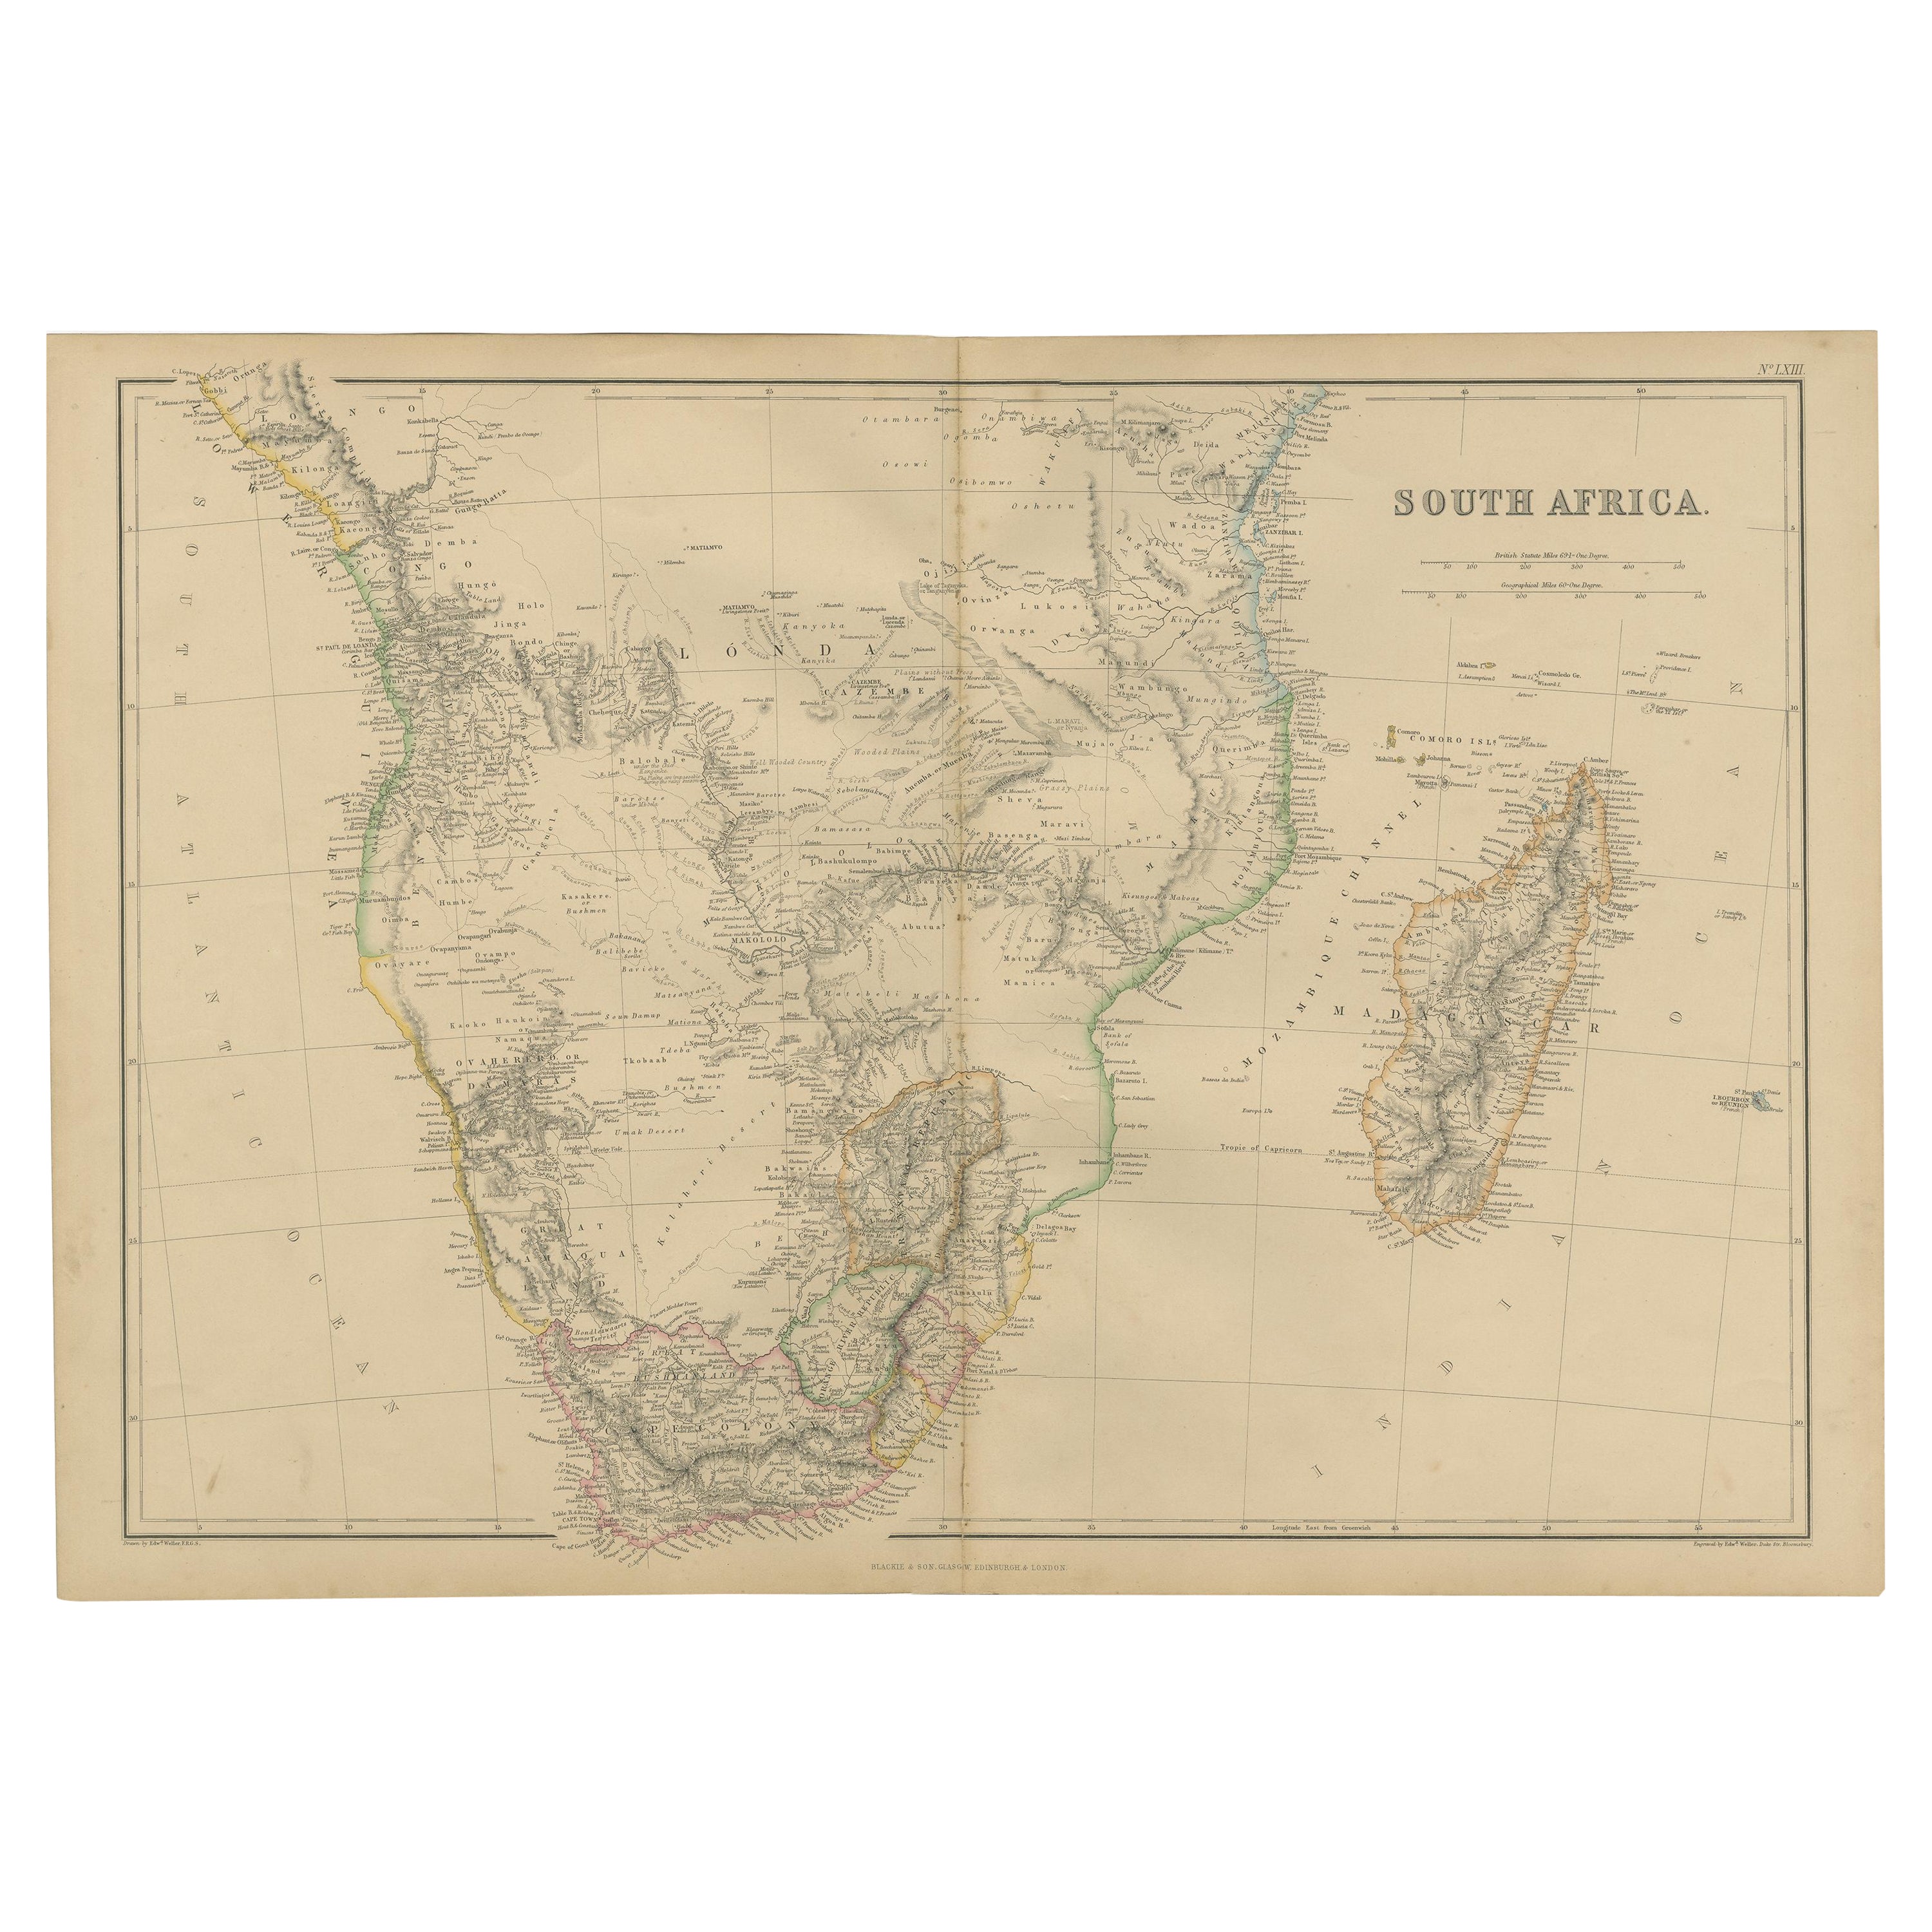 Antique Map of South Africa by W. G. Blackie, 1859